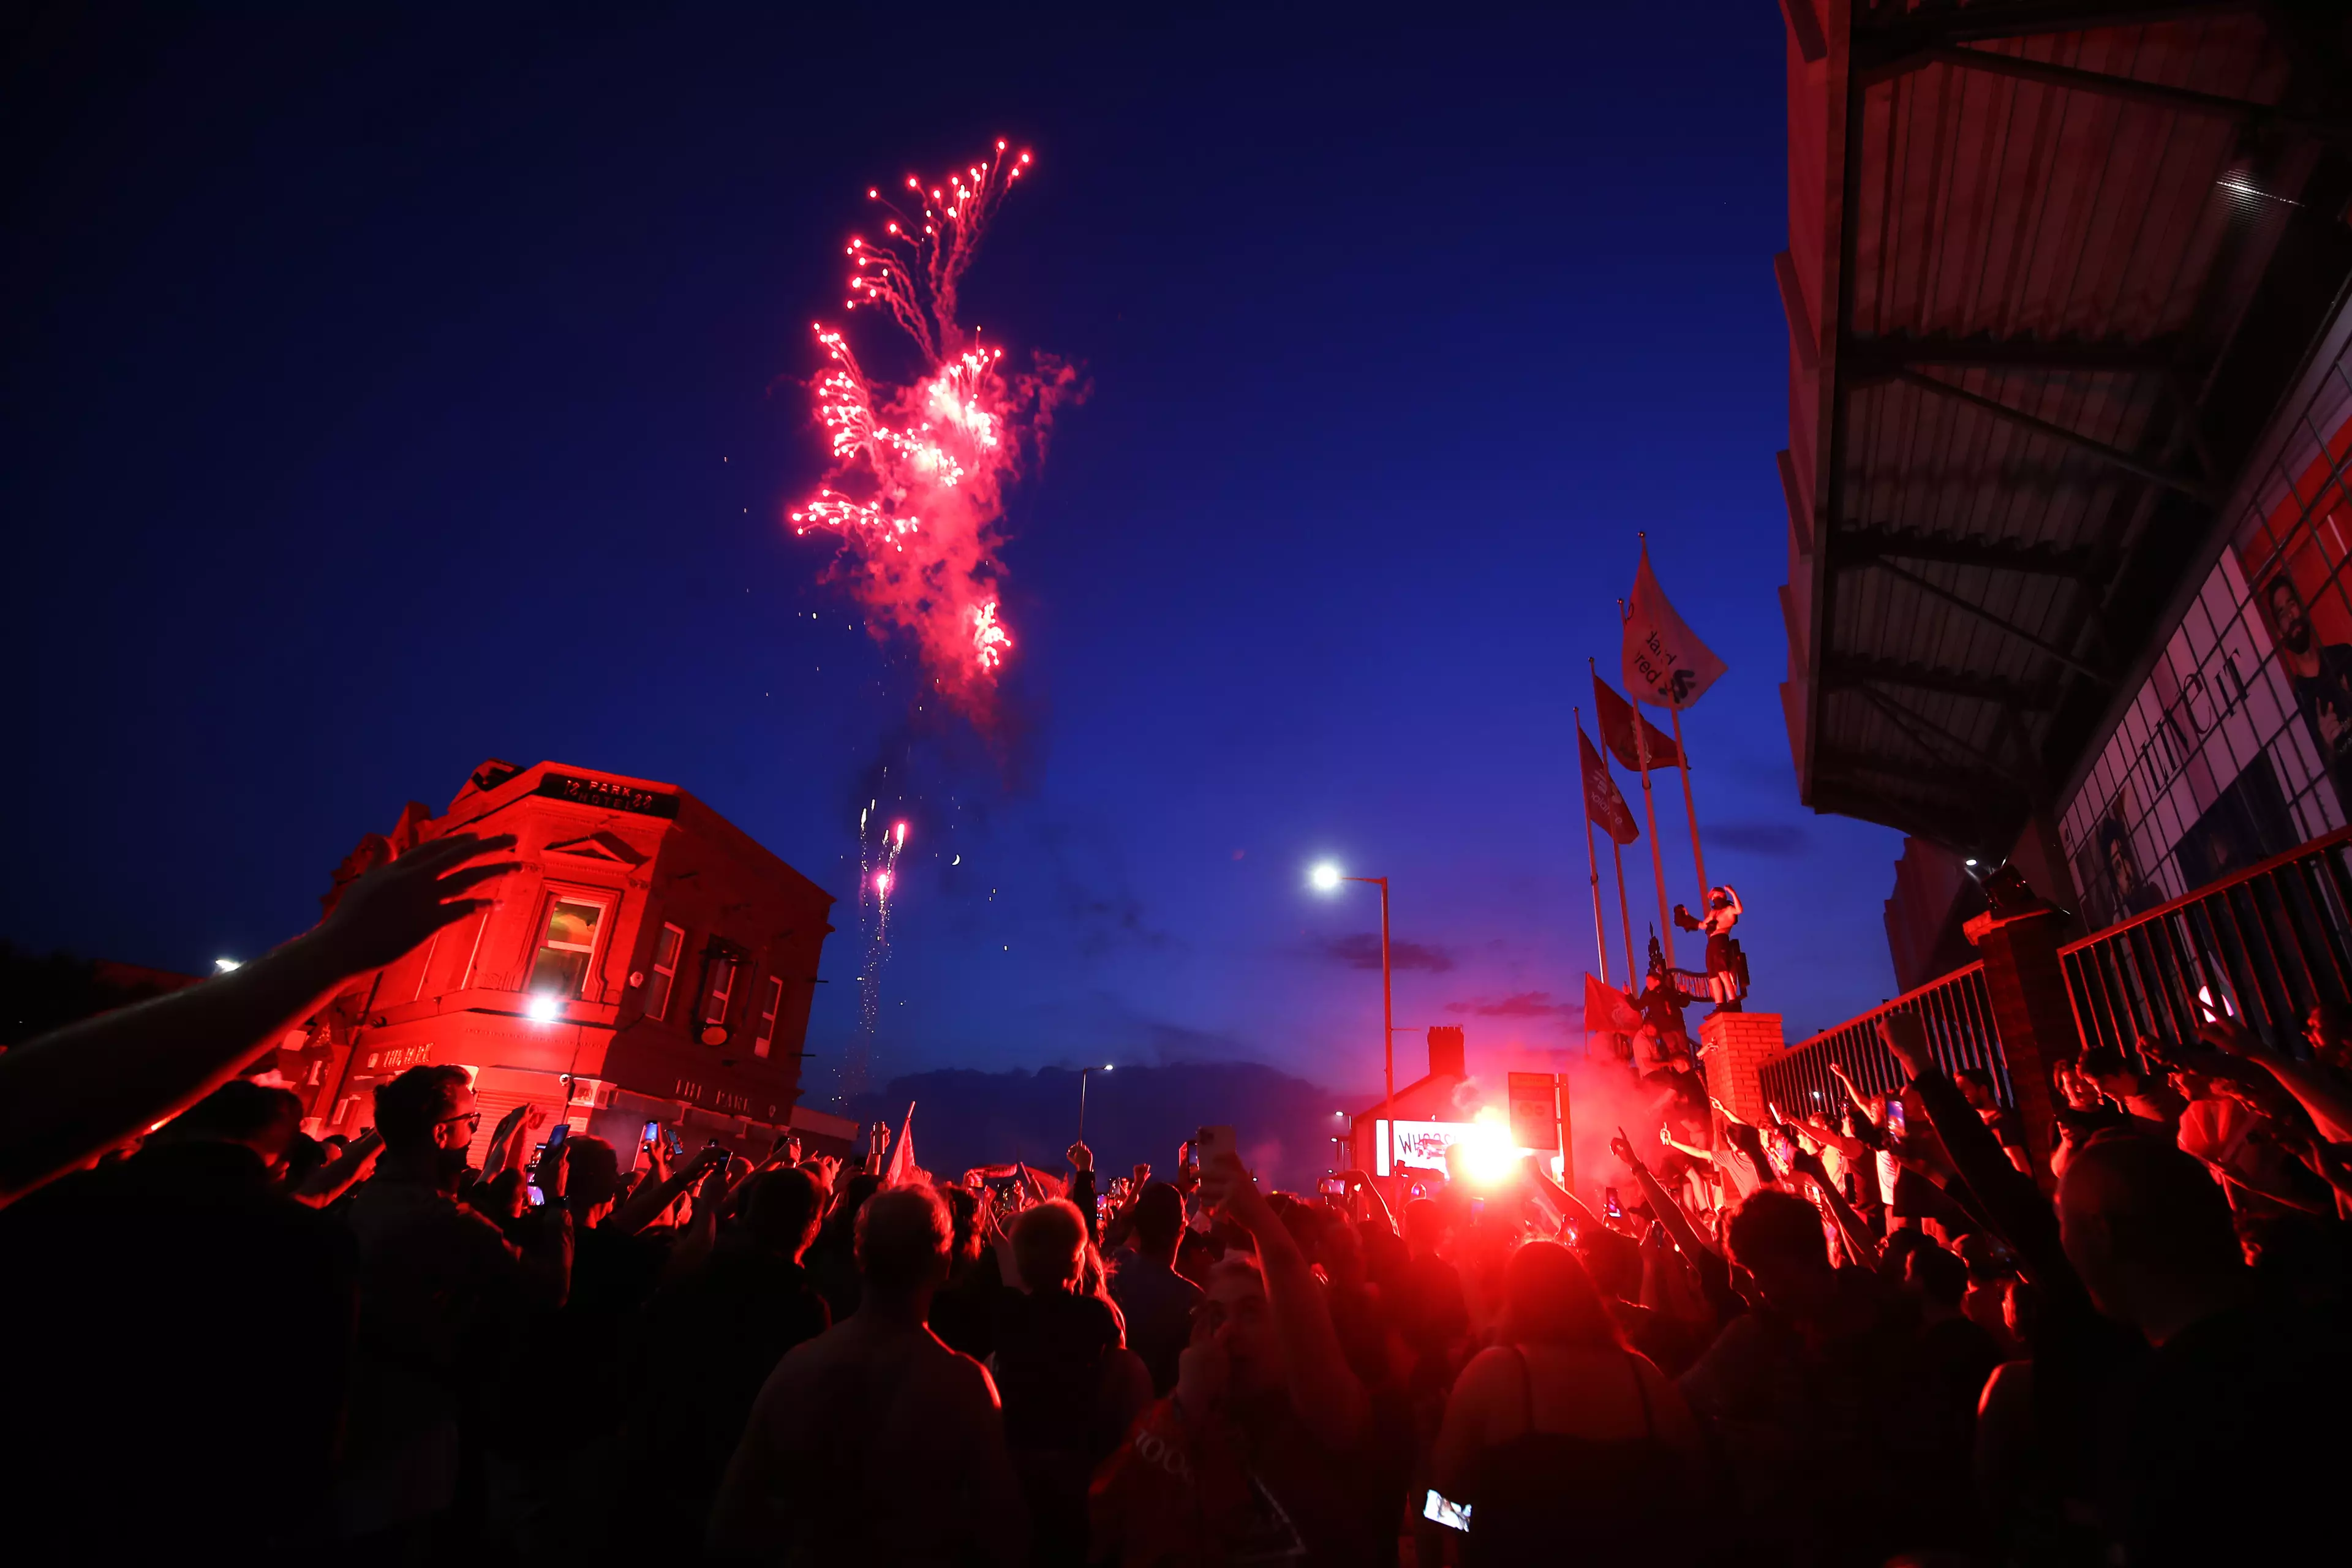 Liverpool fans celebrate their title win on Thursday night. Image: PA Images